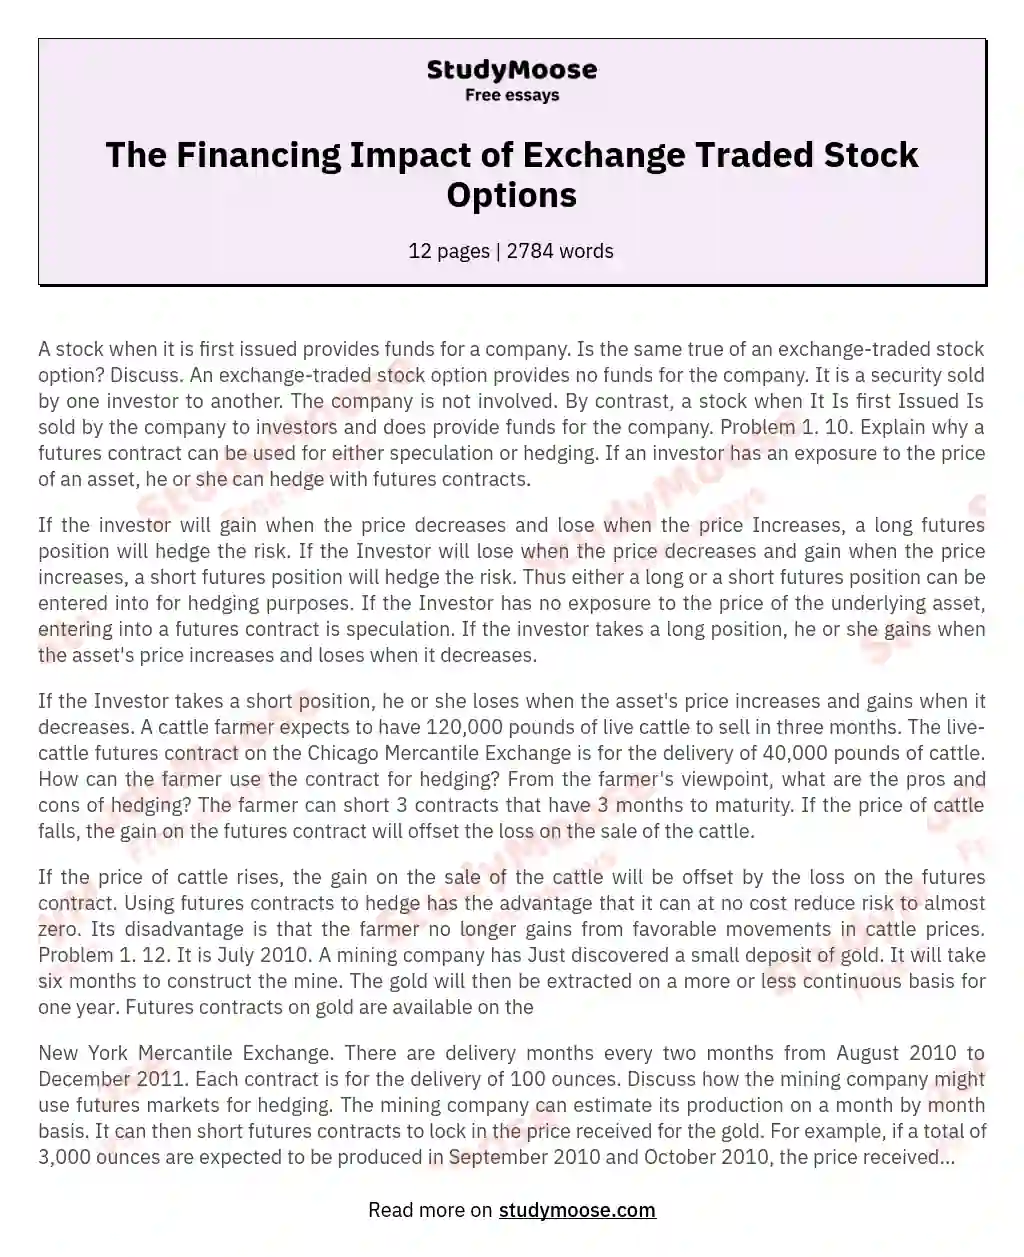 The Financing Impact of Exchange Traded Stock Options essay